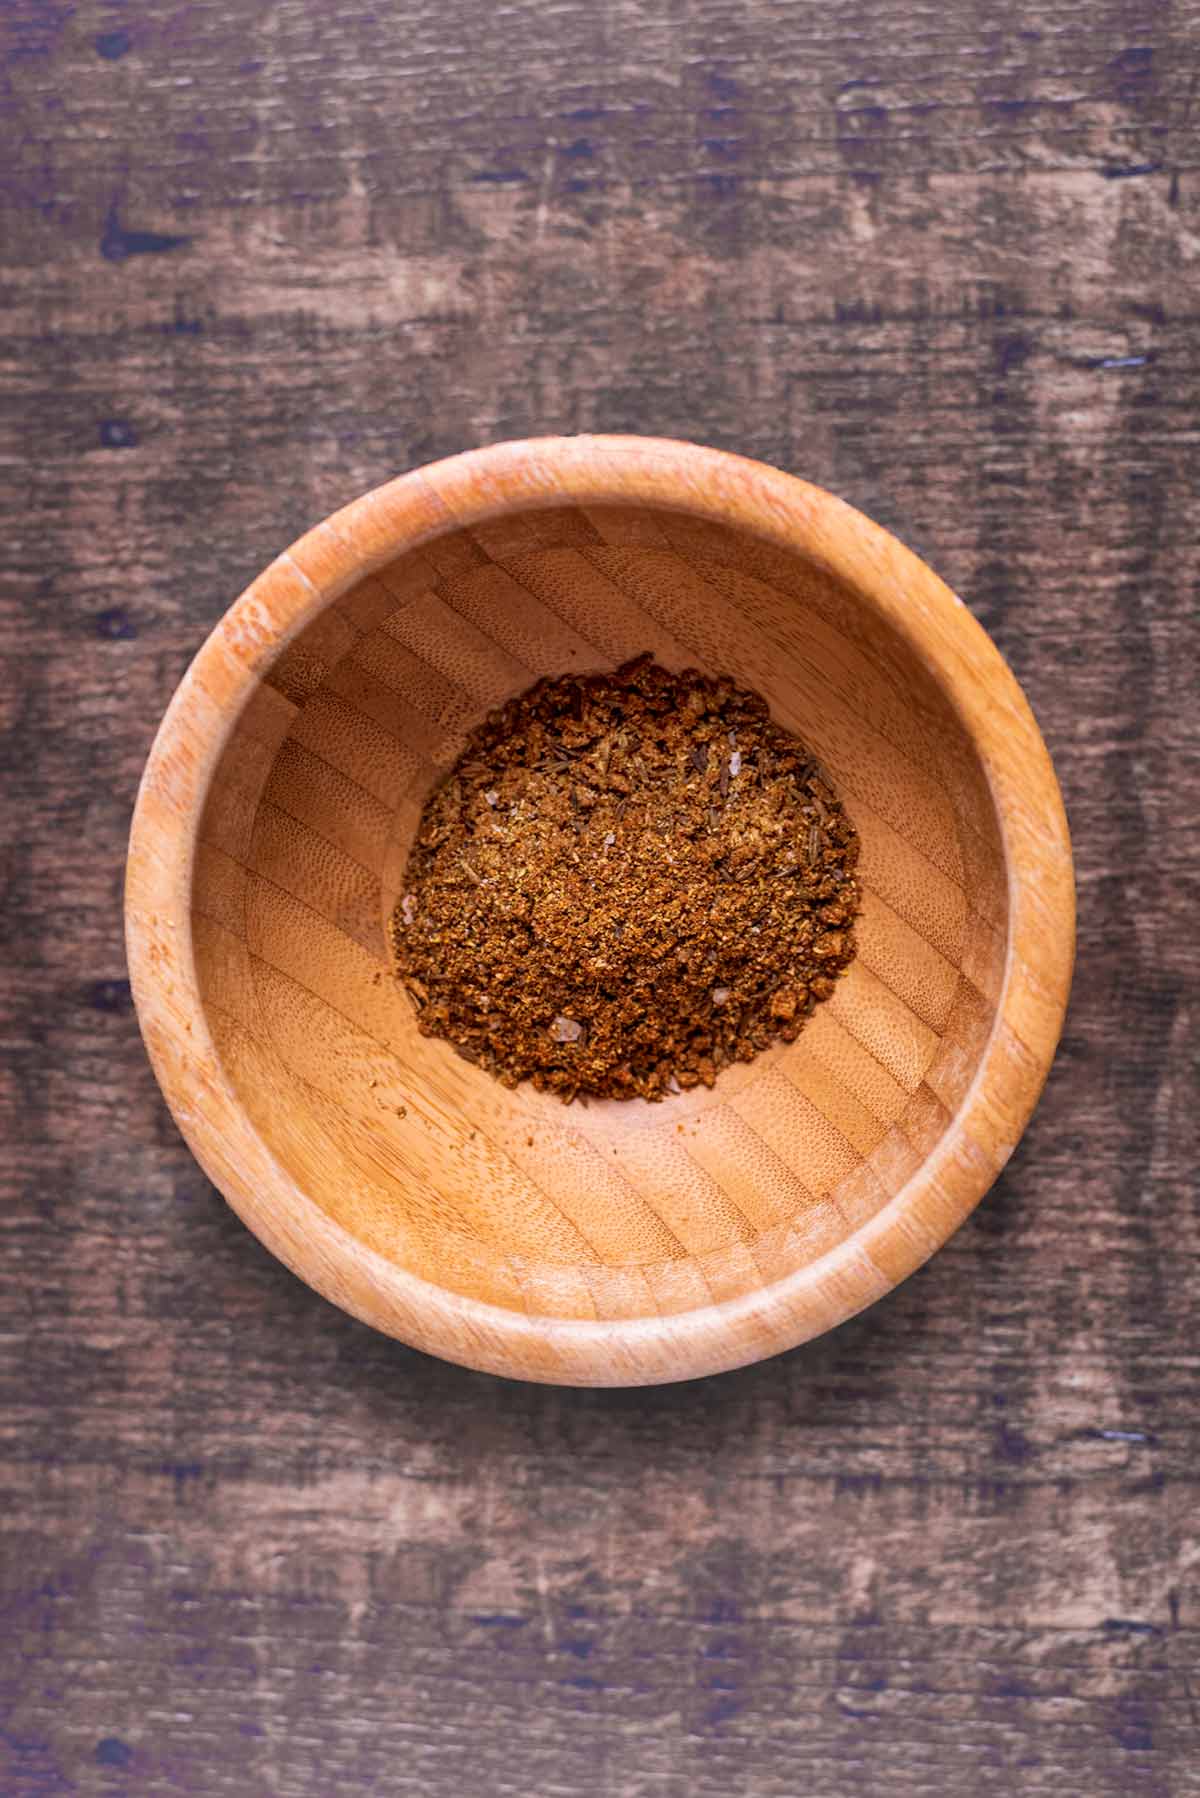 Toasted spices in a small wooden bowl.